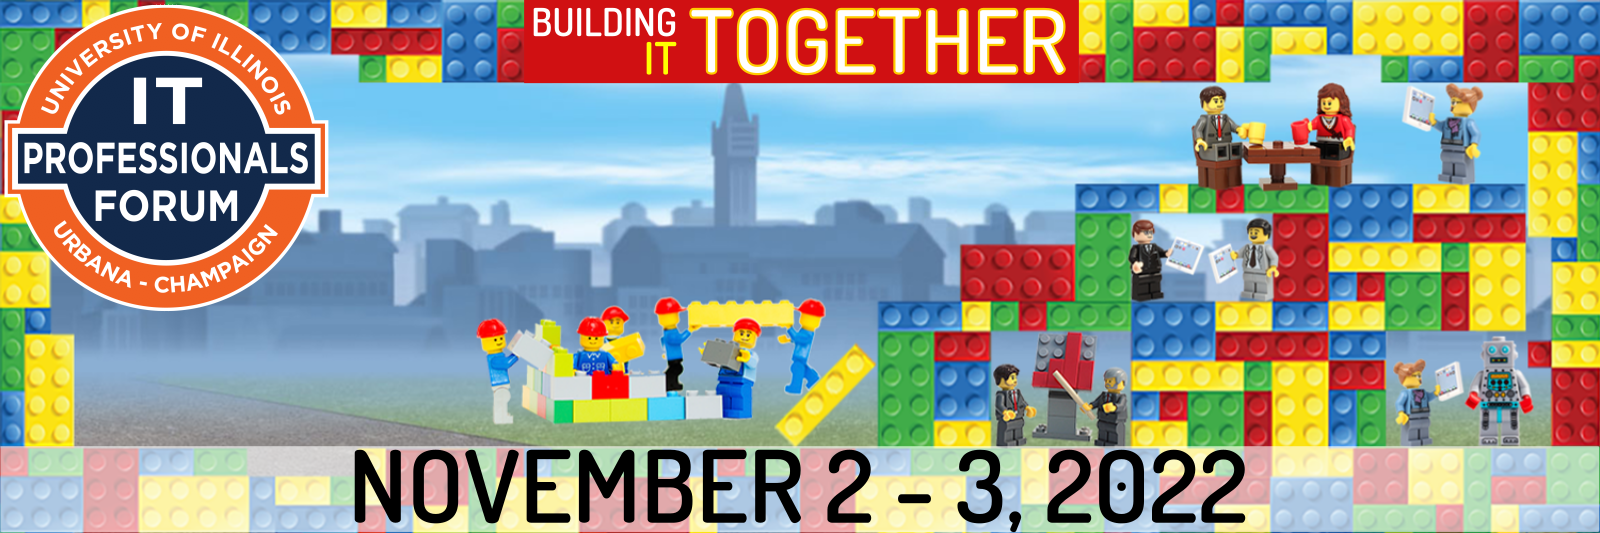 Building IT Together - IT PRO FORUM Fall 2022 - NOVEMBER 2nd & 3rd